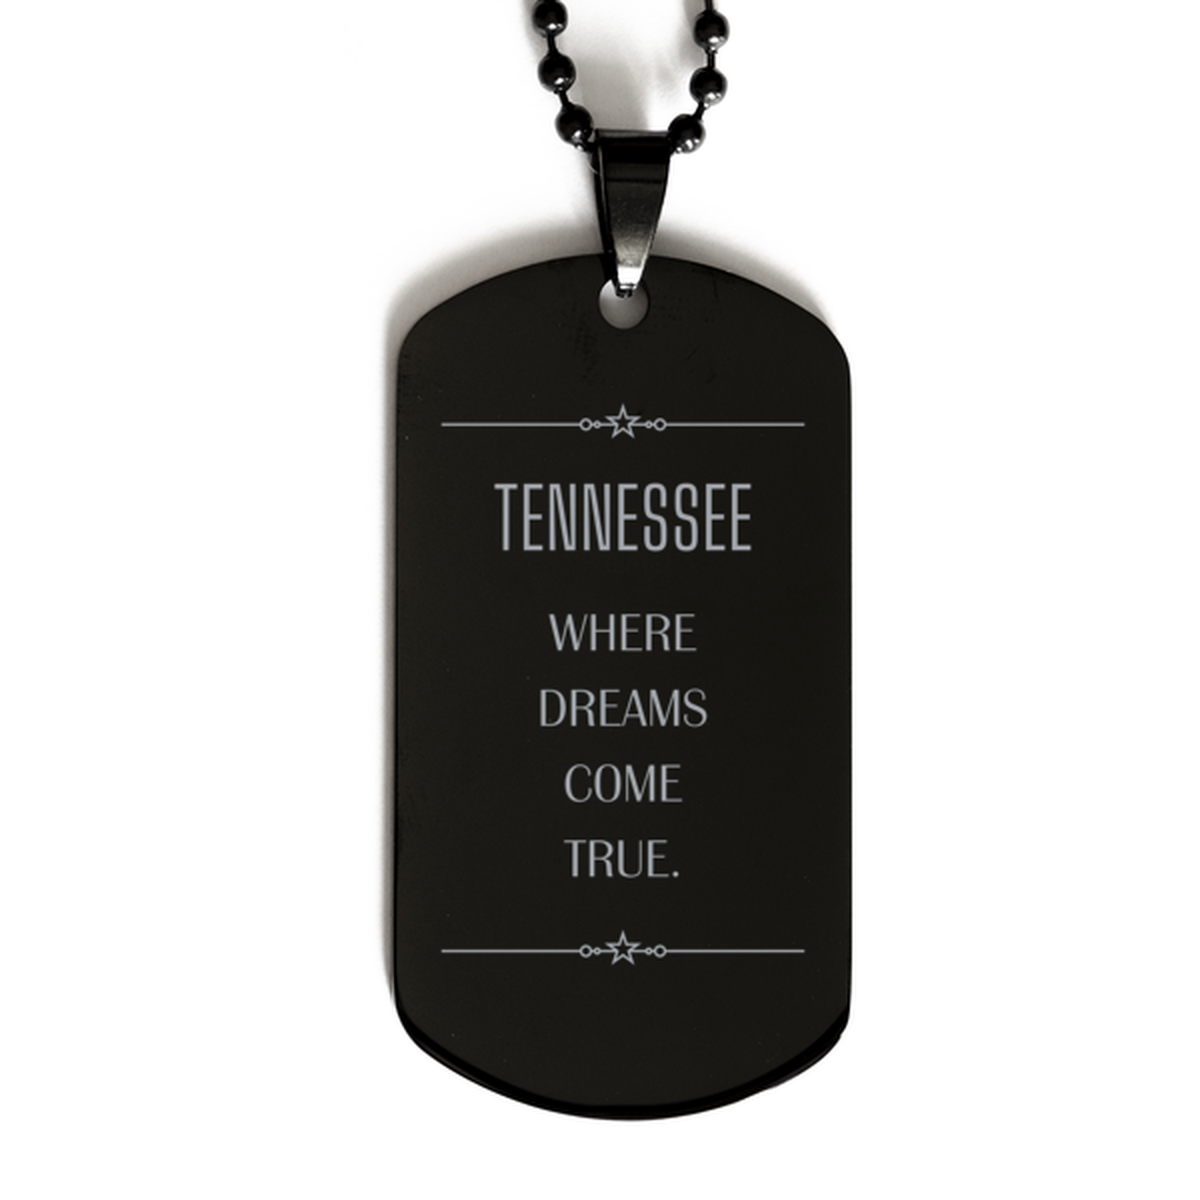 Love Tennessee State Black Dog Tag, Tennessee Where dreams come true, Birthday Inspirational Gifts For Tennessee Men, Women, Friends